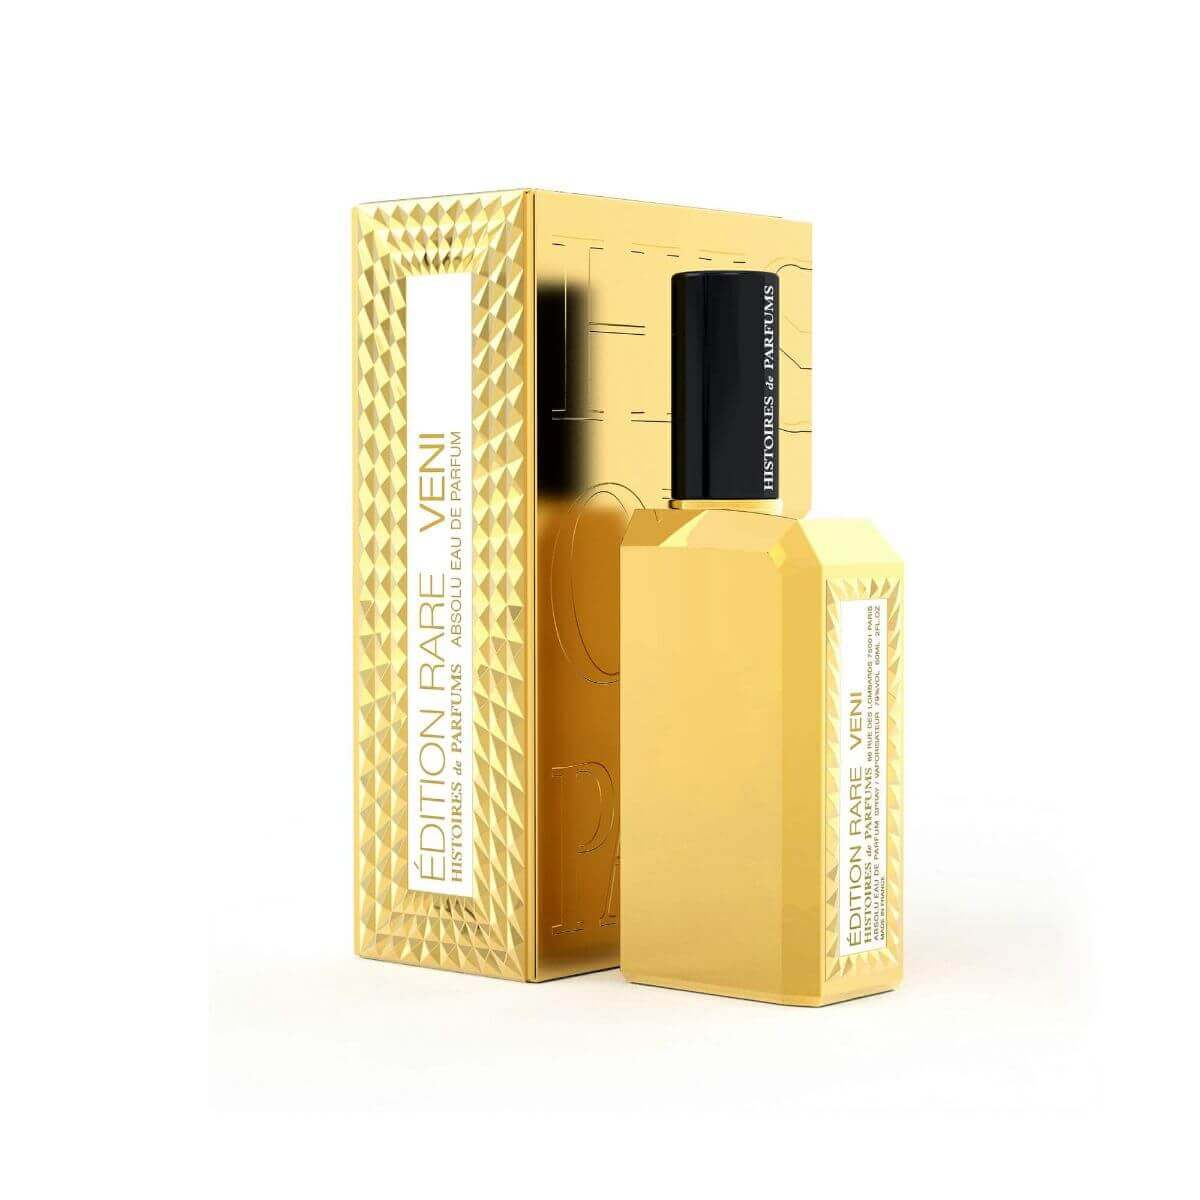 Histoires De Parfum – Veni Yellow Gold, A Musky Floral Scent For Both Women And Mena Golden Bottle, A Symbol Of Wealth, A Royal Scent Filled With Pure Cardamom And Saffron WavesTop Notes : Cinnamon, Absolu Cardamom, Lavender, GalbanumHeart Notes : Gaiac Wood, Saffron, CarnationBase Notes: Ambergris, Oakmoss, Musk, Patchouli Oil, Vanilla, Toffee.